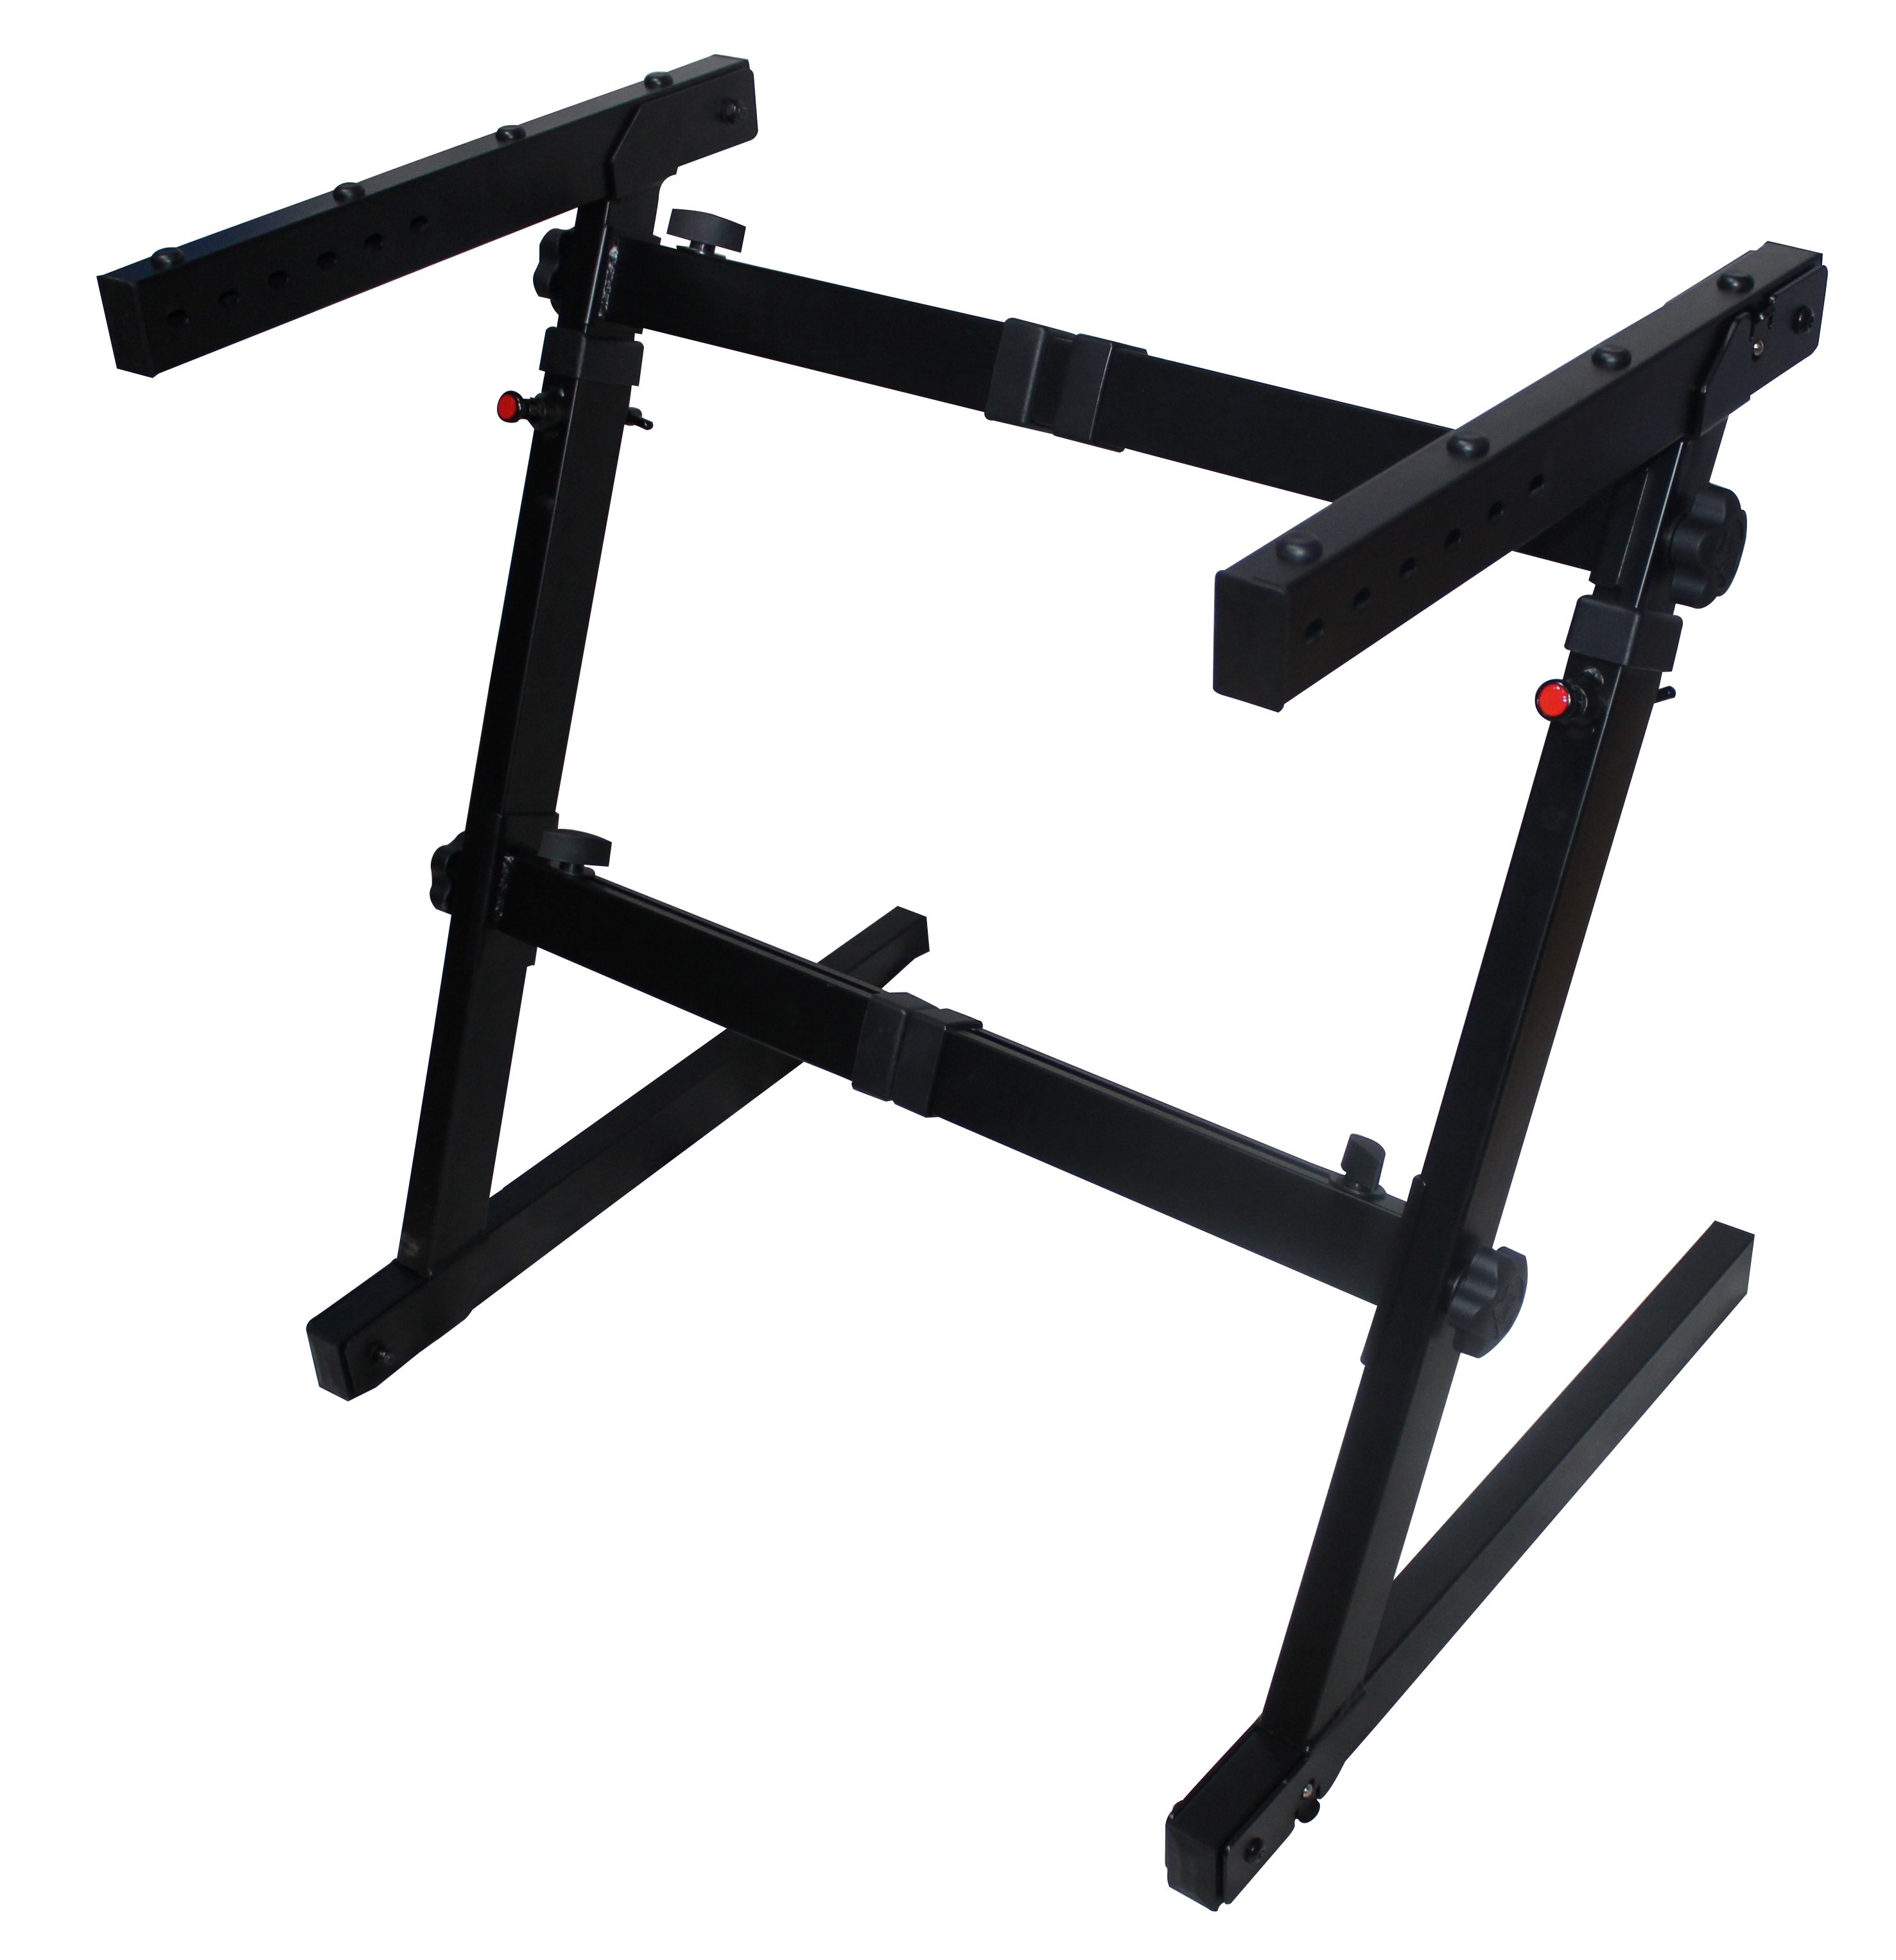 prox-x-zstn-heavy-duty-z-stand-keyboard-case-stand-with-adjustable-width-and-height.jpeg